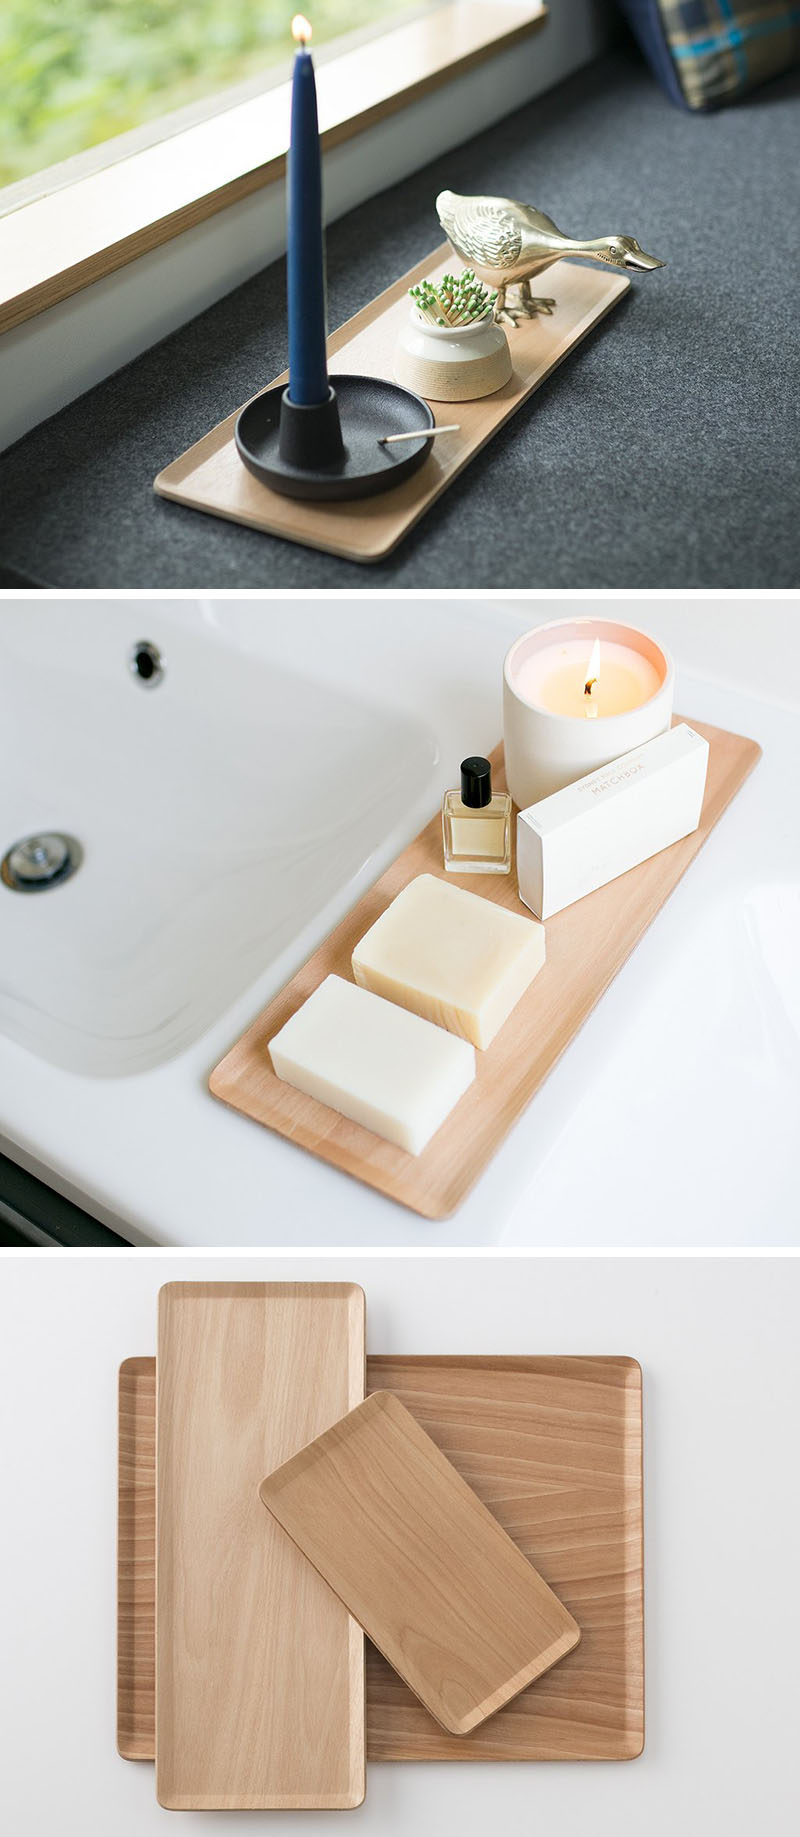 These light wood trays have slightly raised edges that makes them suitable for any environment, even in the bathroom as they prevent liquids from from spilling all over the counter.